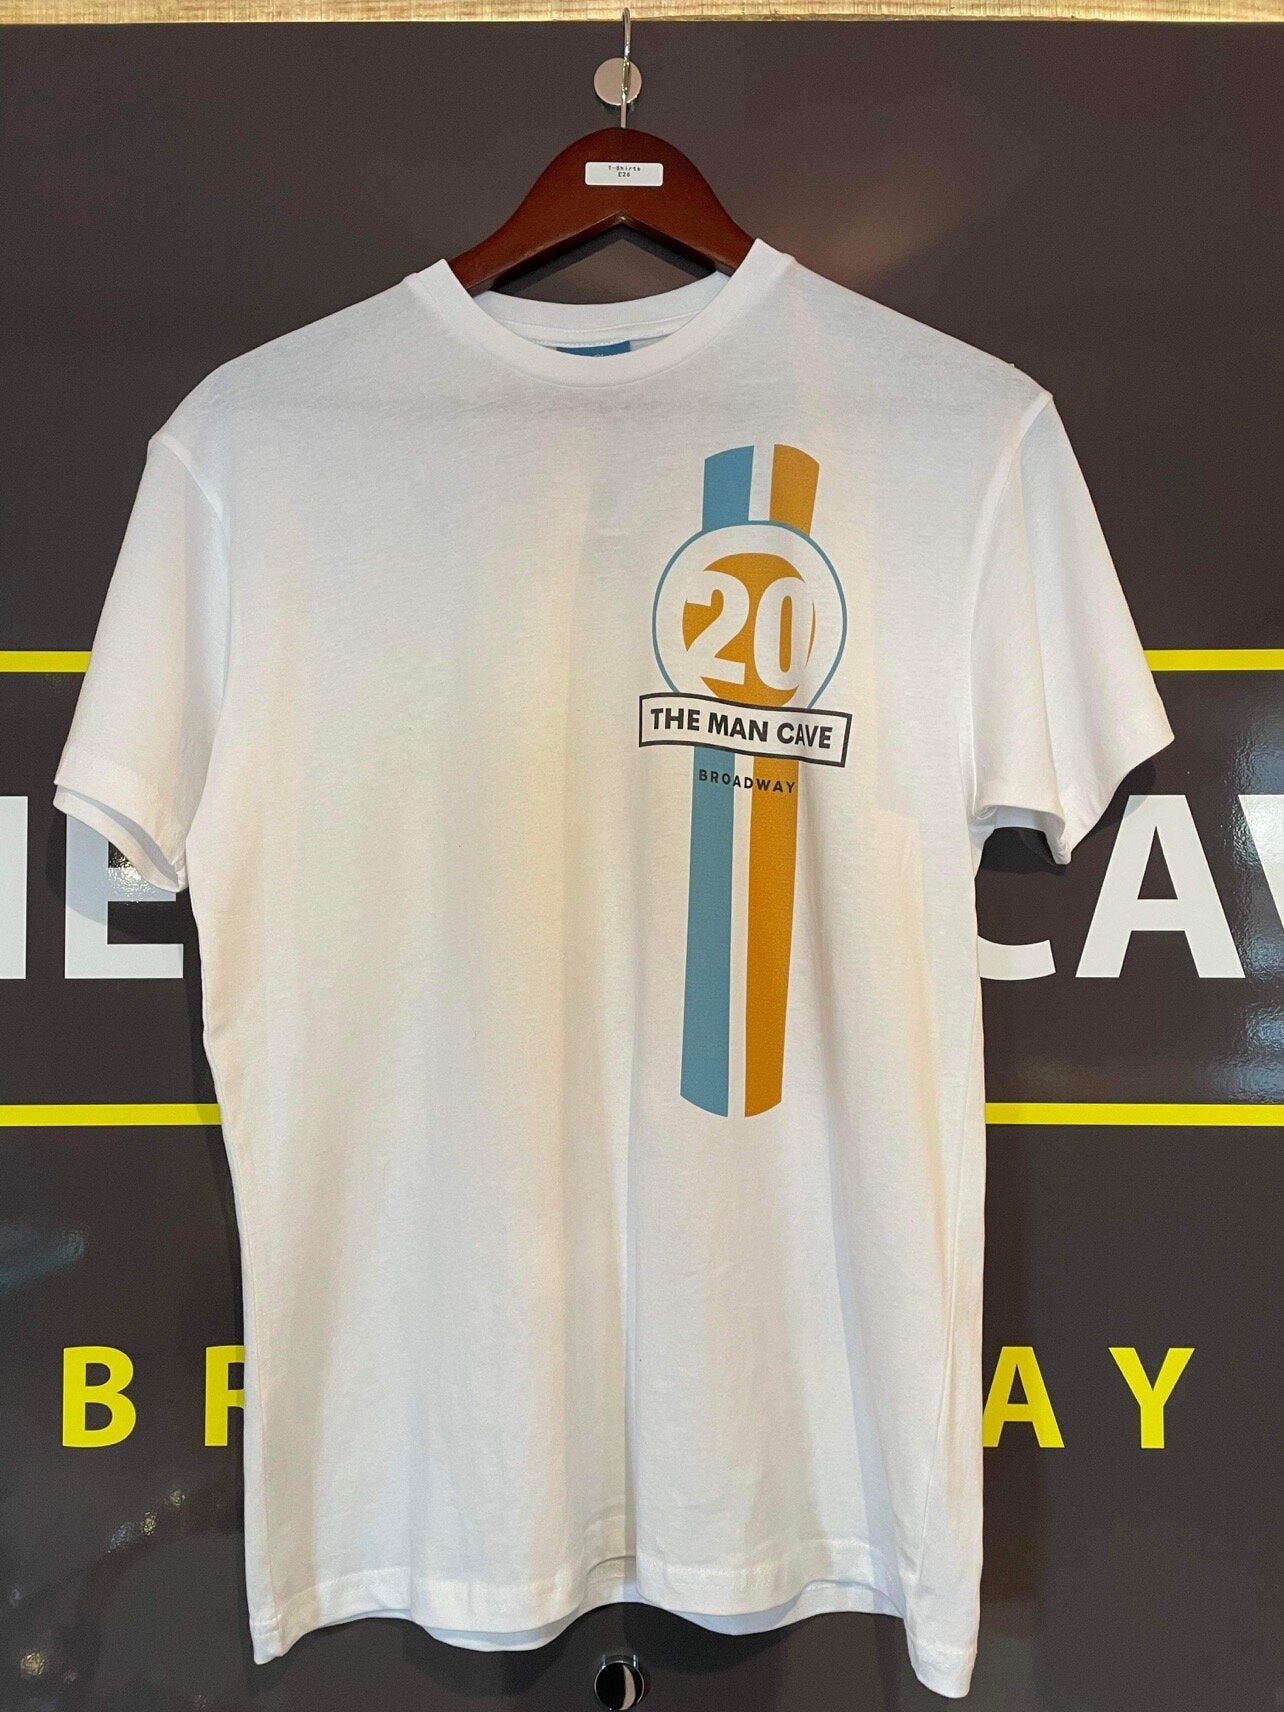 Man Cave T-Shirt Race Number 20 Gulf